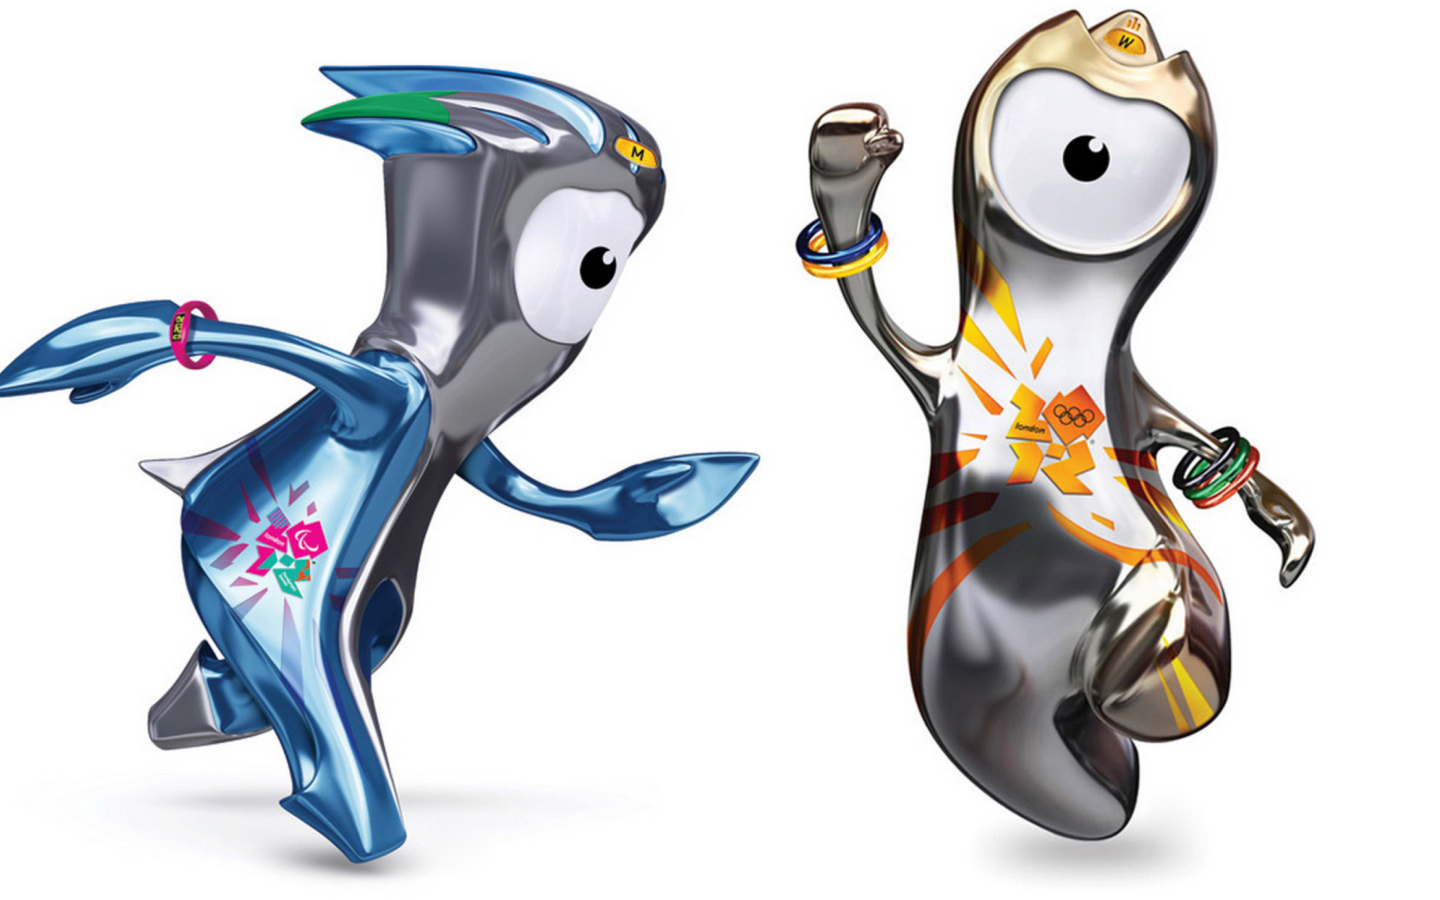 Wenlock and Mandevillelond 2012 Olympic Games wallpaper 1440x900